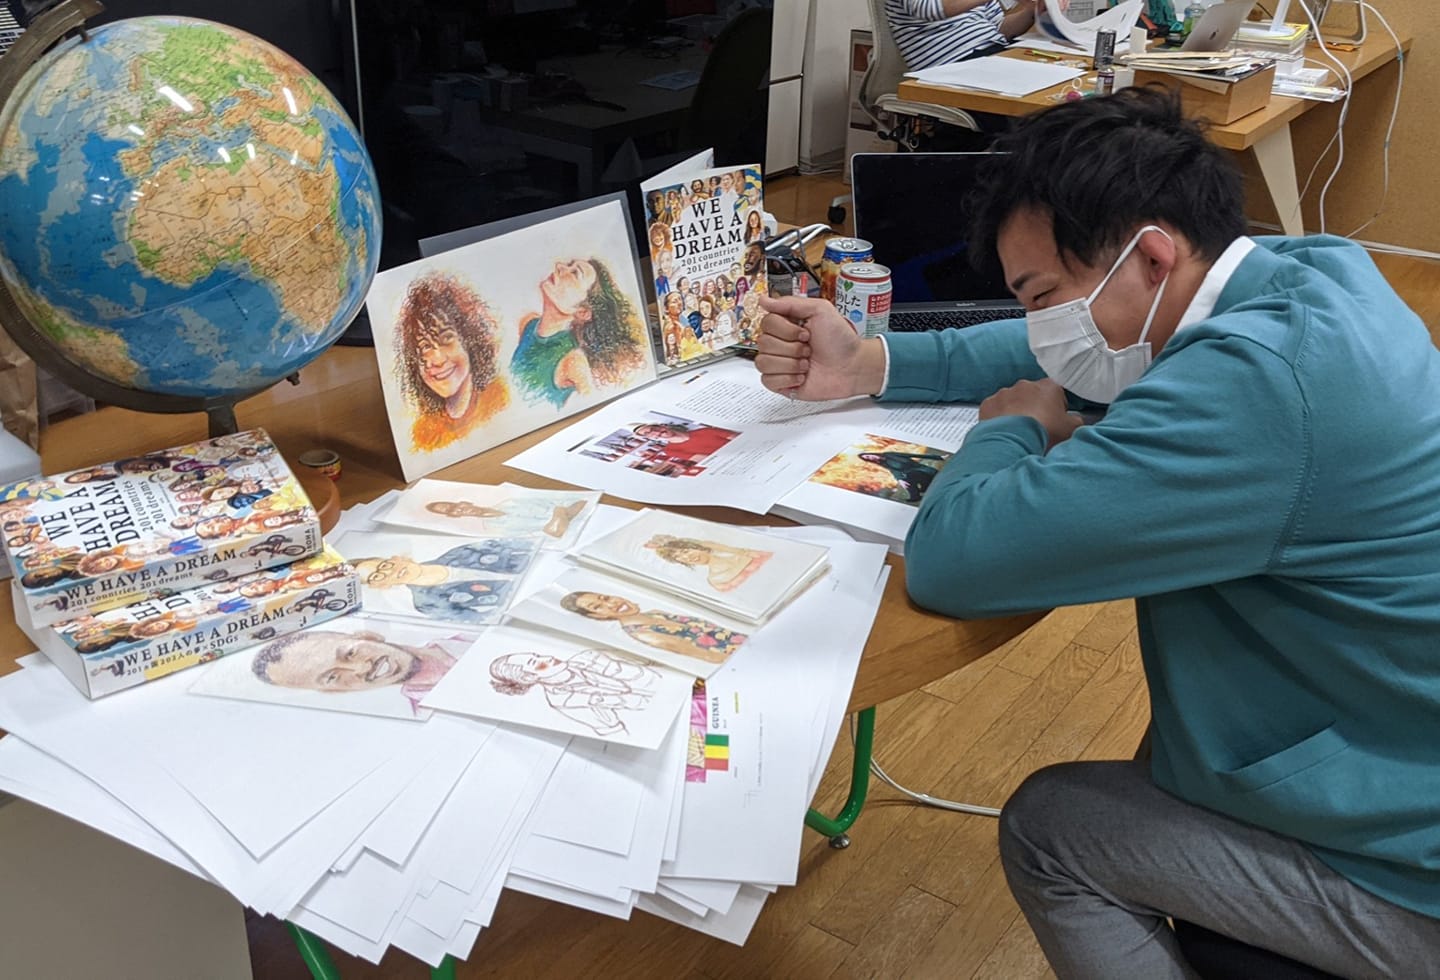 Ichikawa sits hunched over a table of sketches and drafts for WE HAVE A DREAM